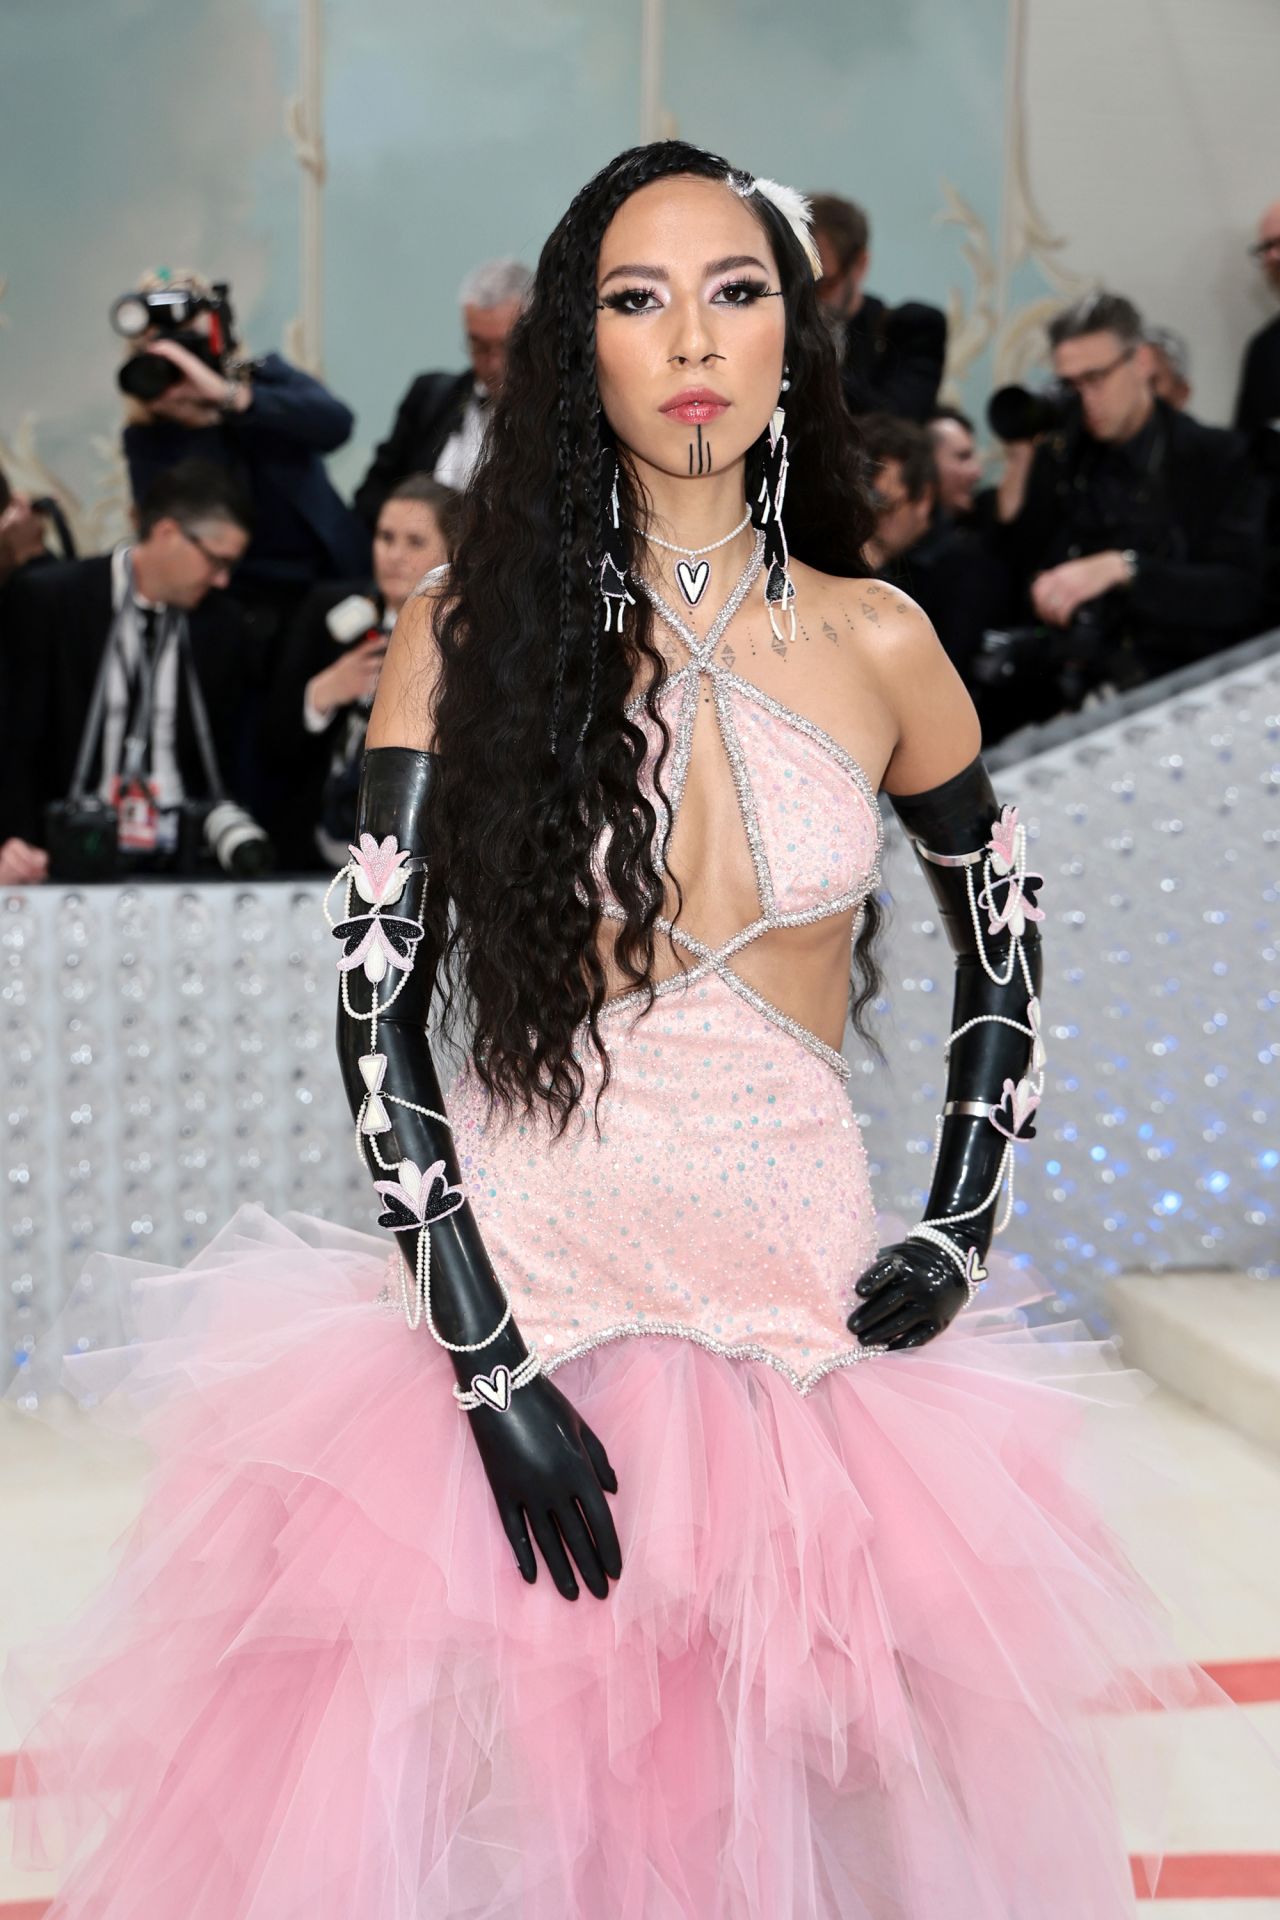 Model Quannah Chasinghorse in a pink tulle Prabal Gurung gown, black Vex Latex gloves and Indigenous jewelry.
